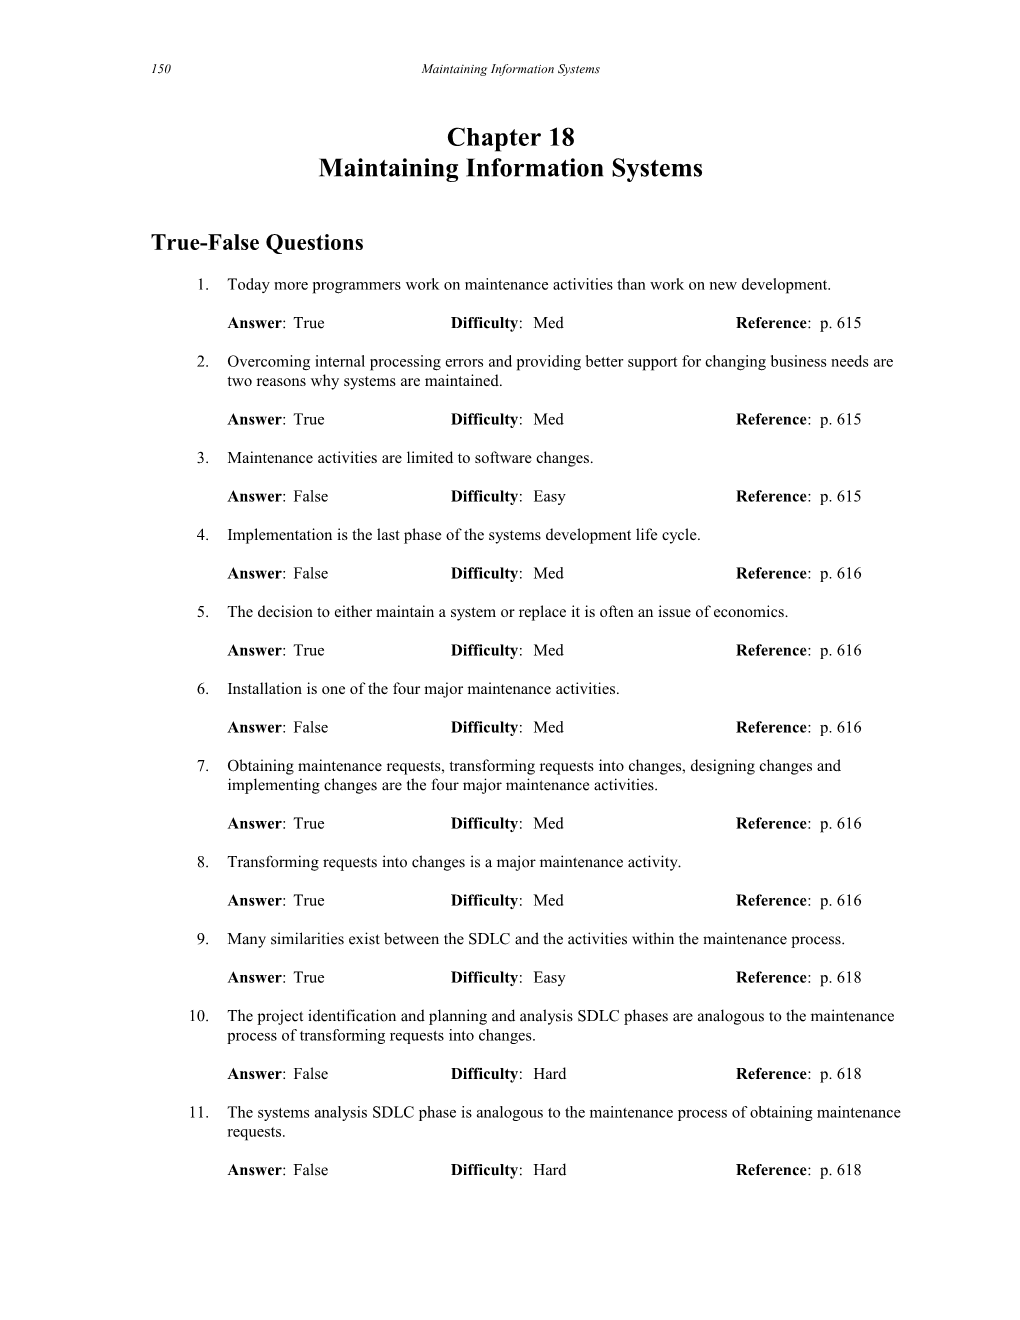 Chapter 18 Maintaining Information Systems 427